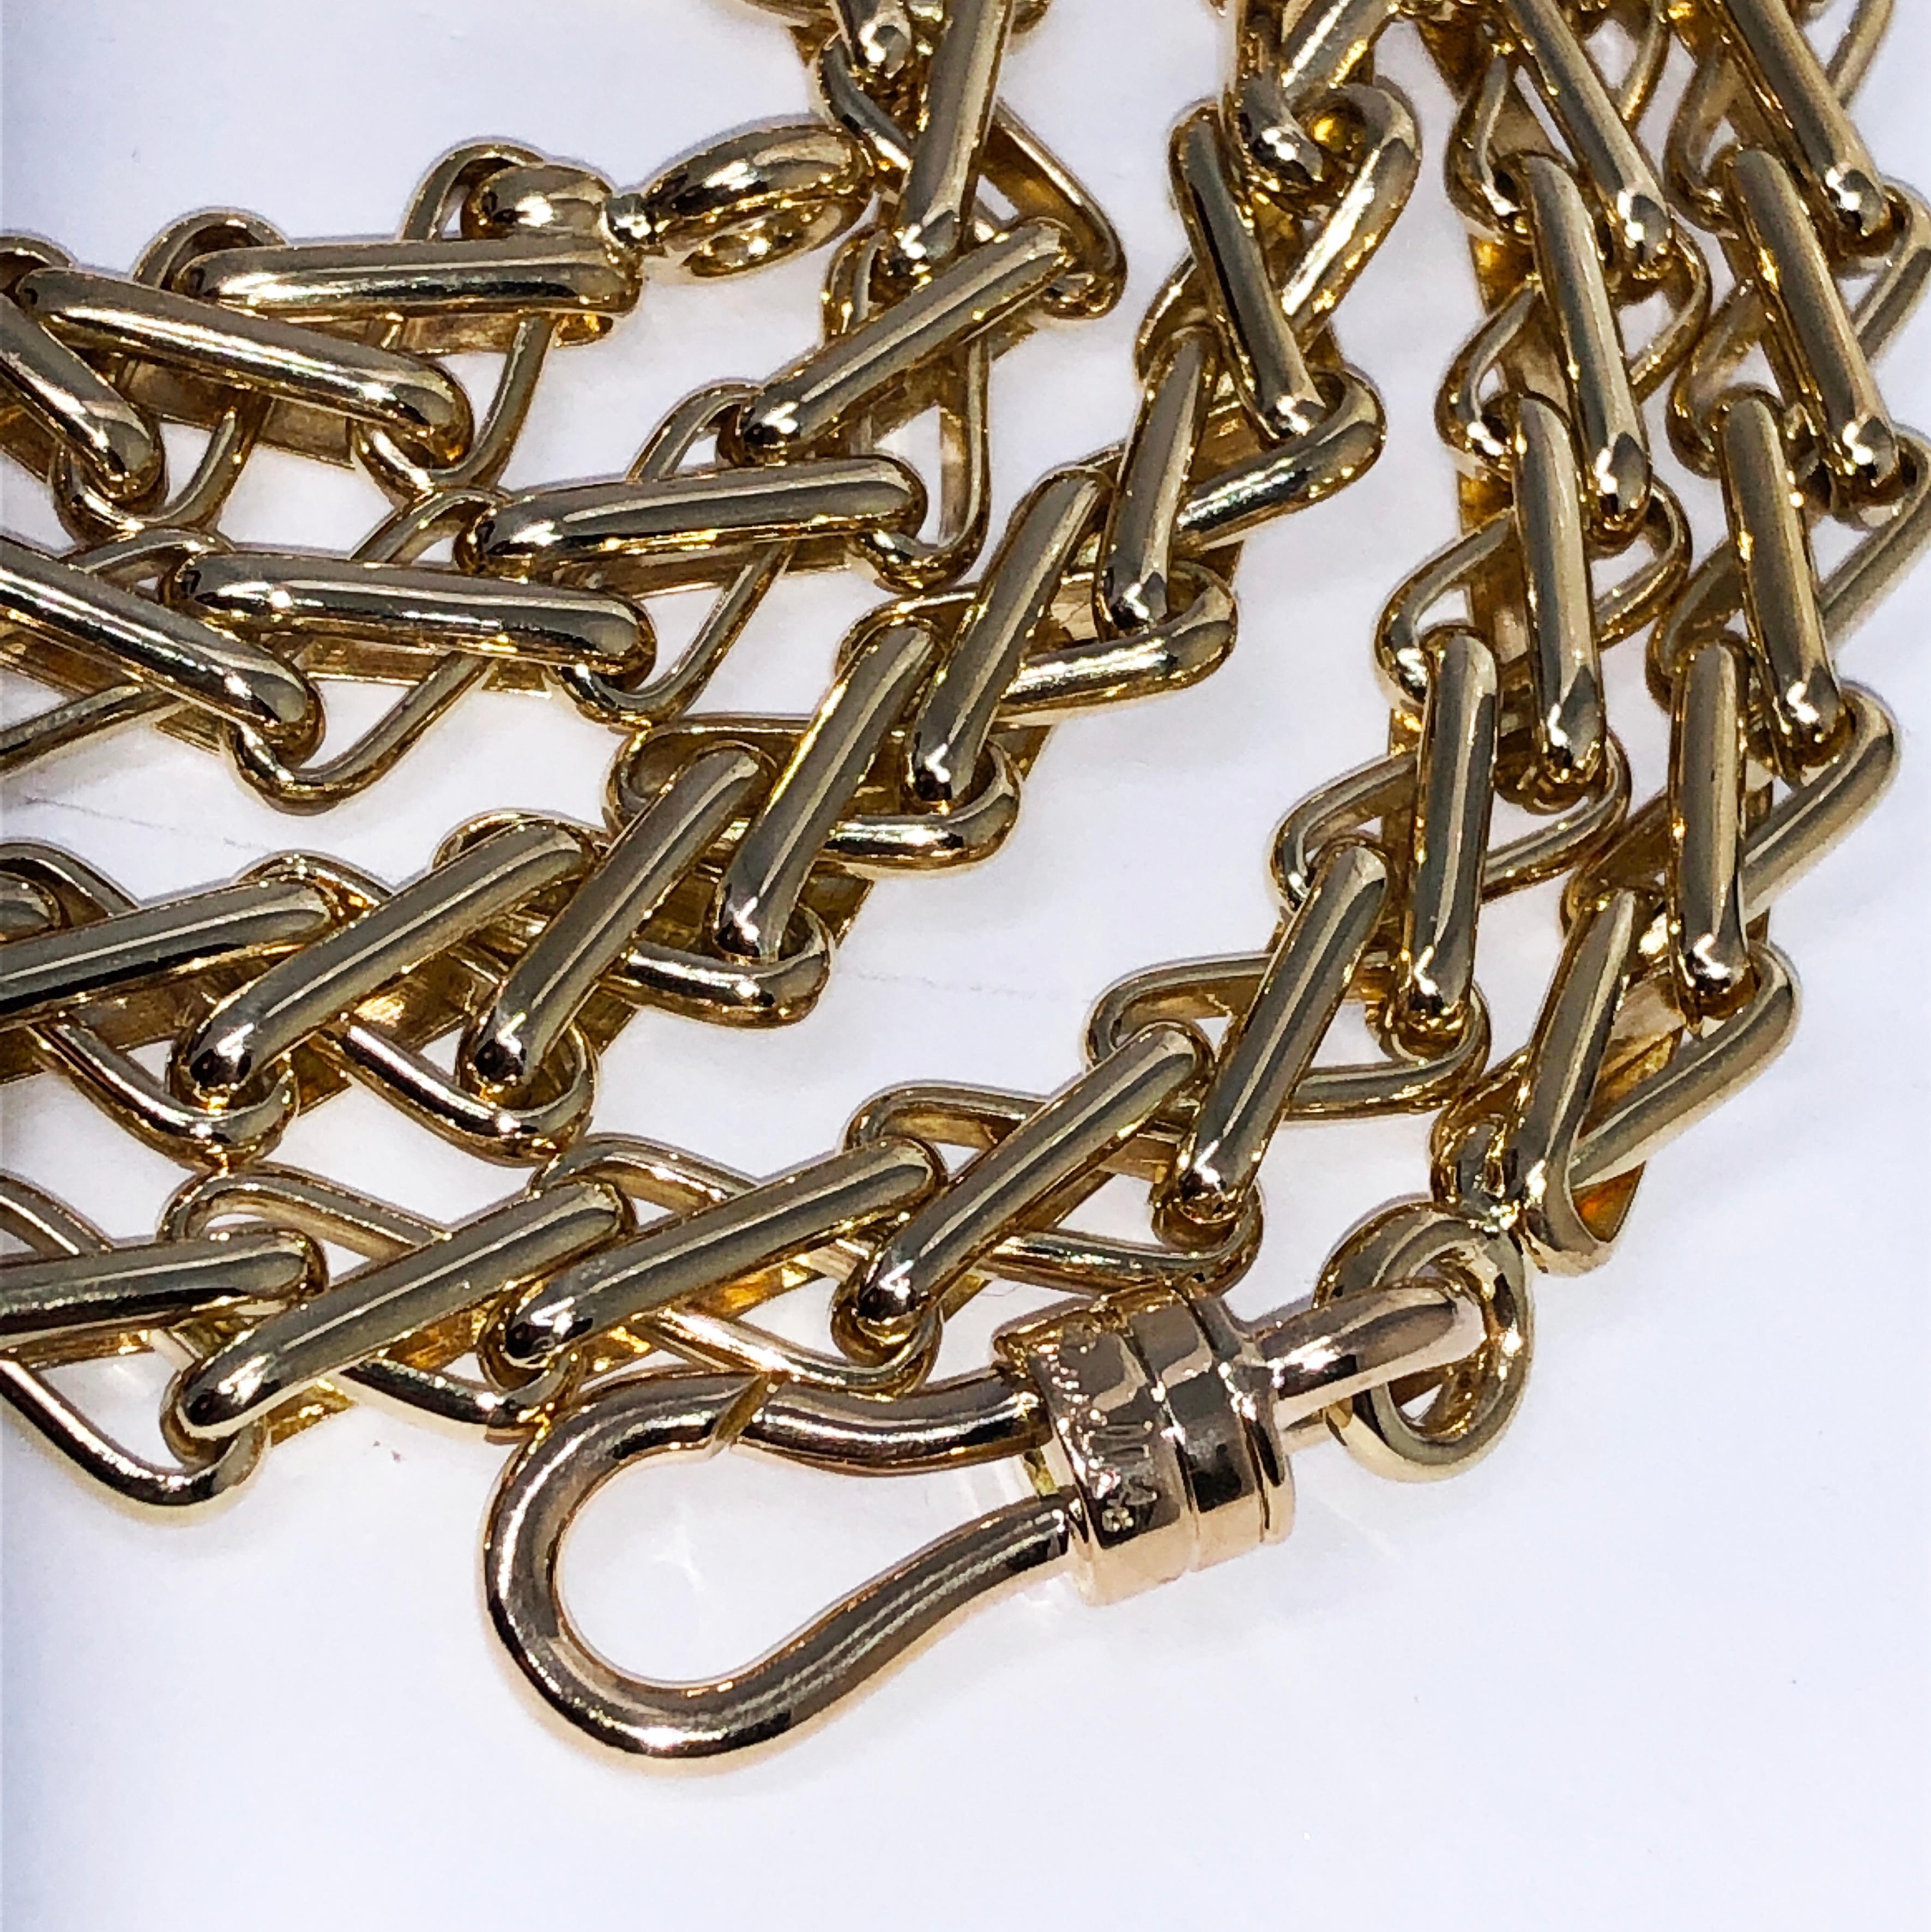 Modern Original 1980 One-of-a-Kind Pomellato 18K Solid Yellow Gold Long Chain Necklace